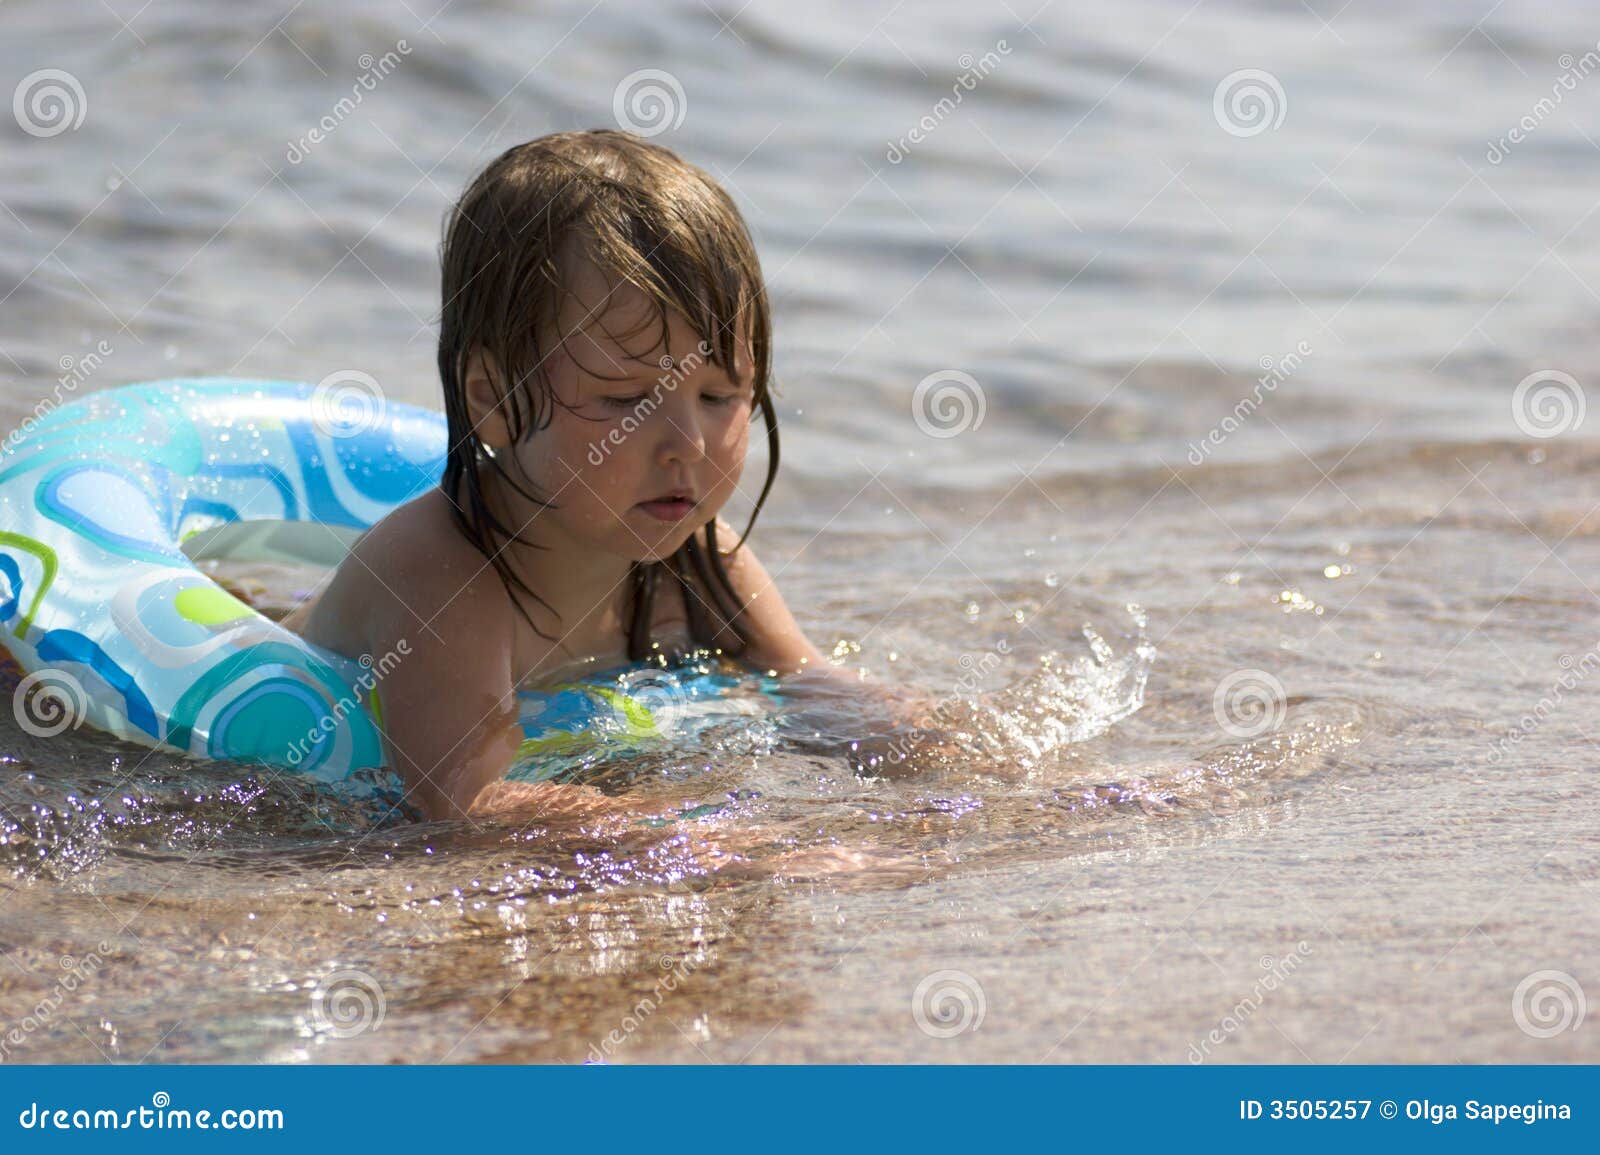 Kid in Buoy Playing with Sand Stock Image - Image of contemplation ...